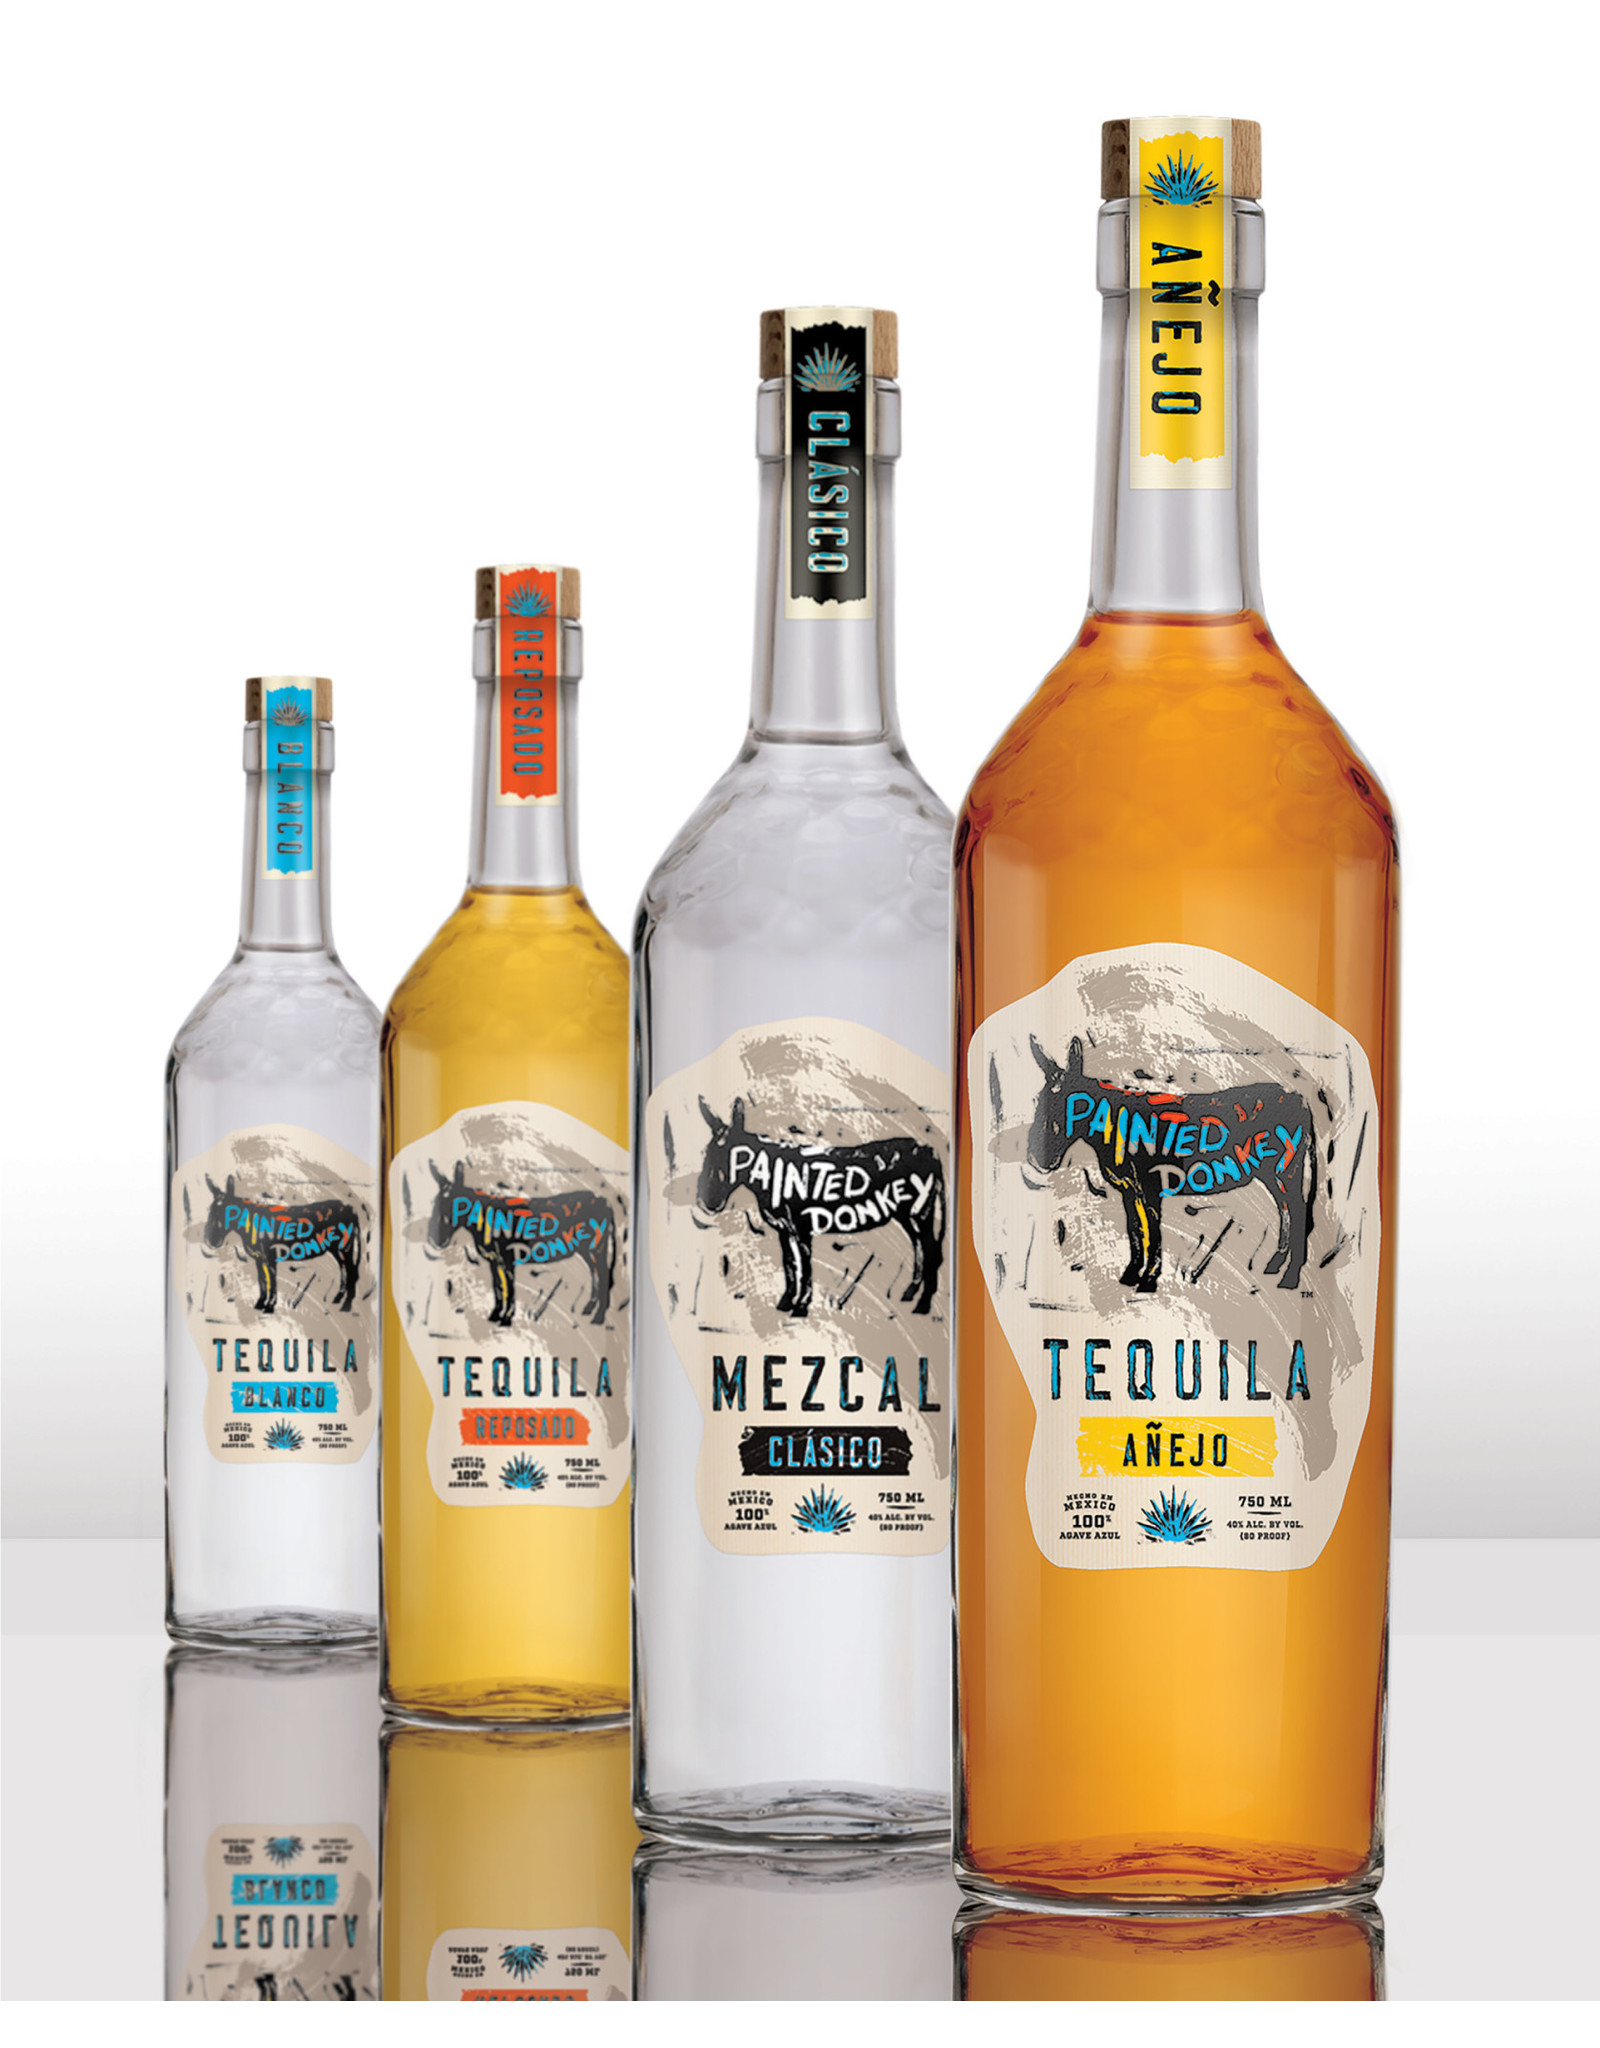 PAINTED DONKEY REPO TEQUILA 750ML